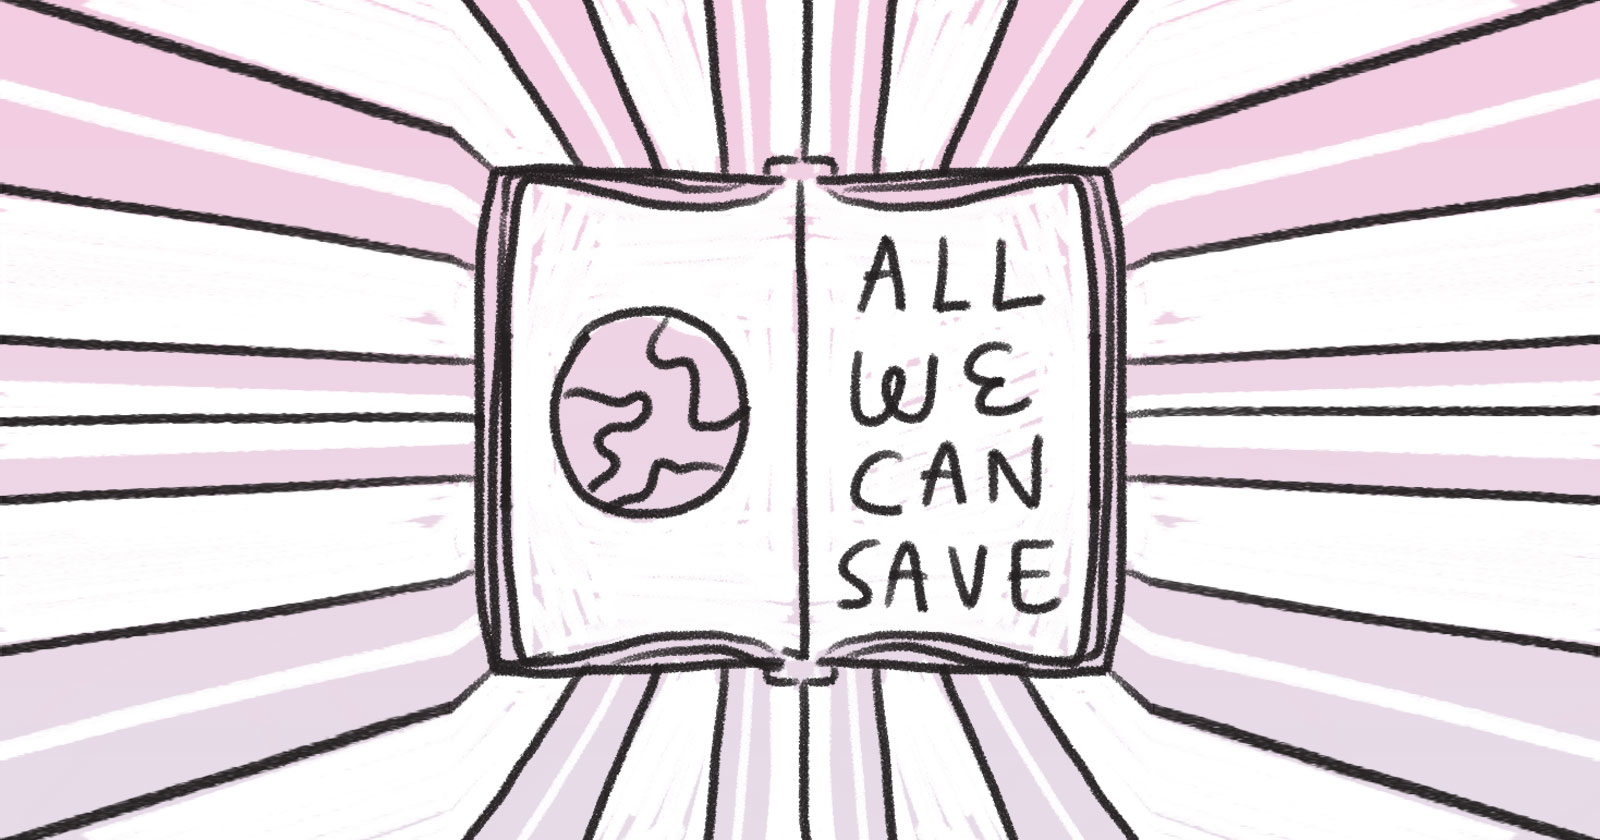 Book that says "All We Can Save"